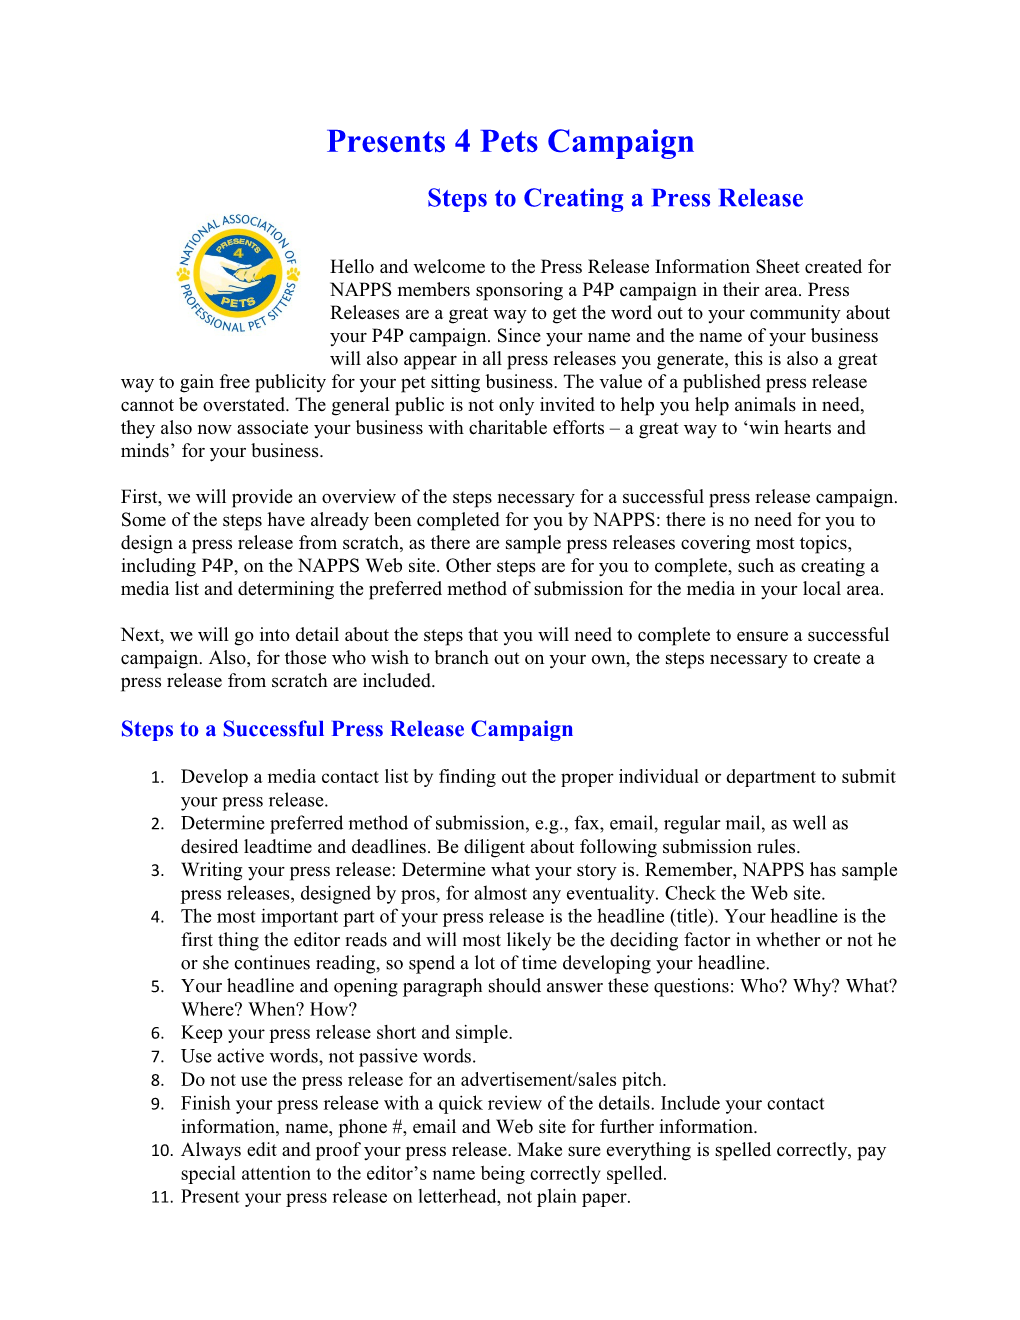 Steps to Creating a Press Release